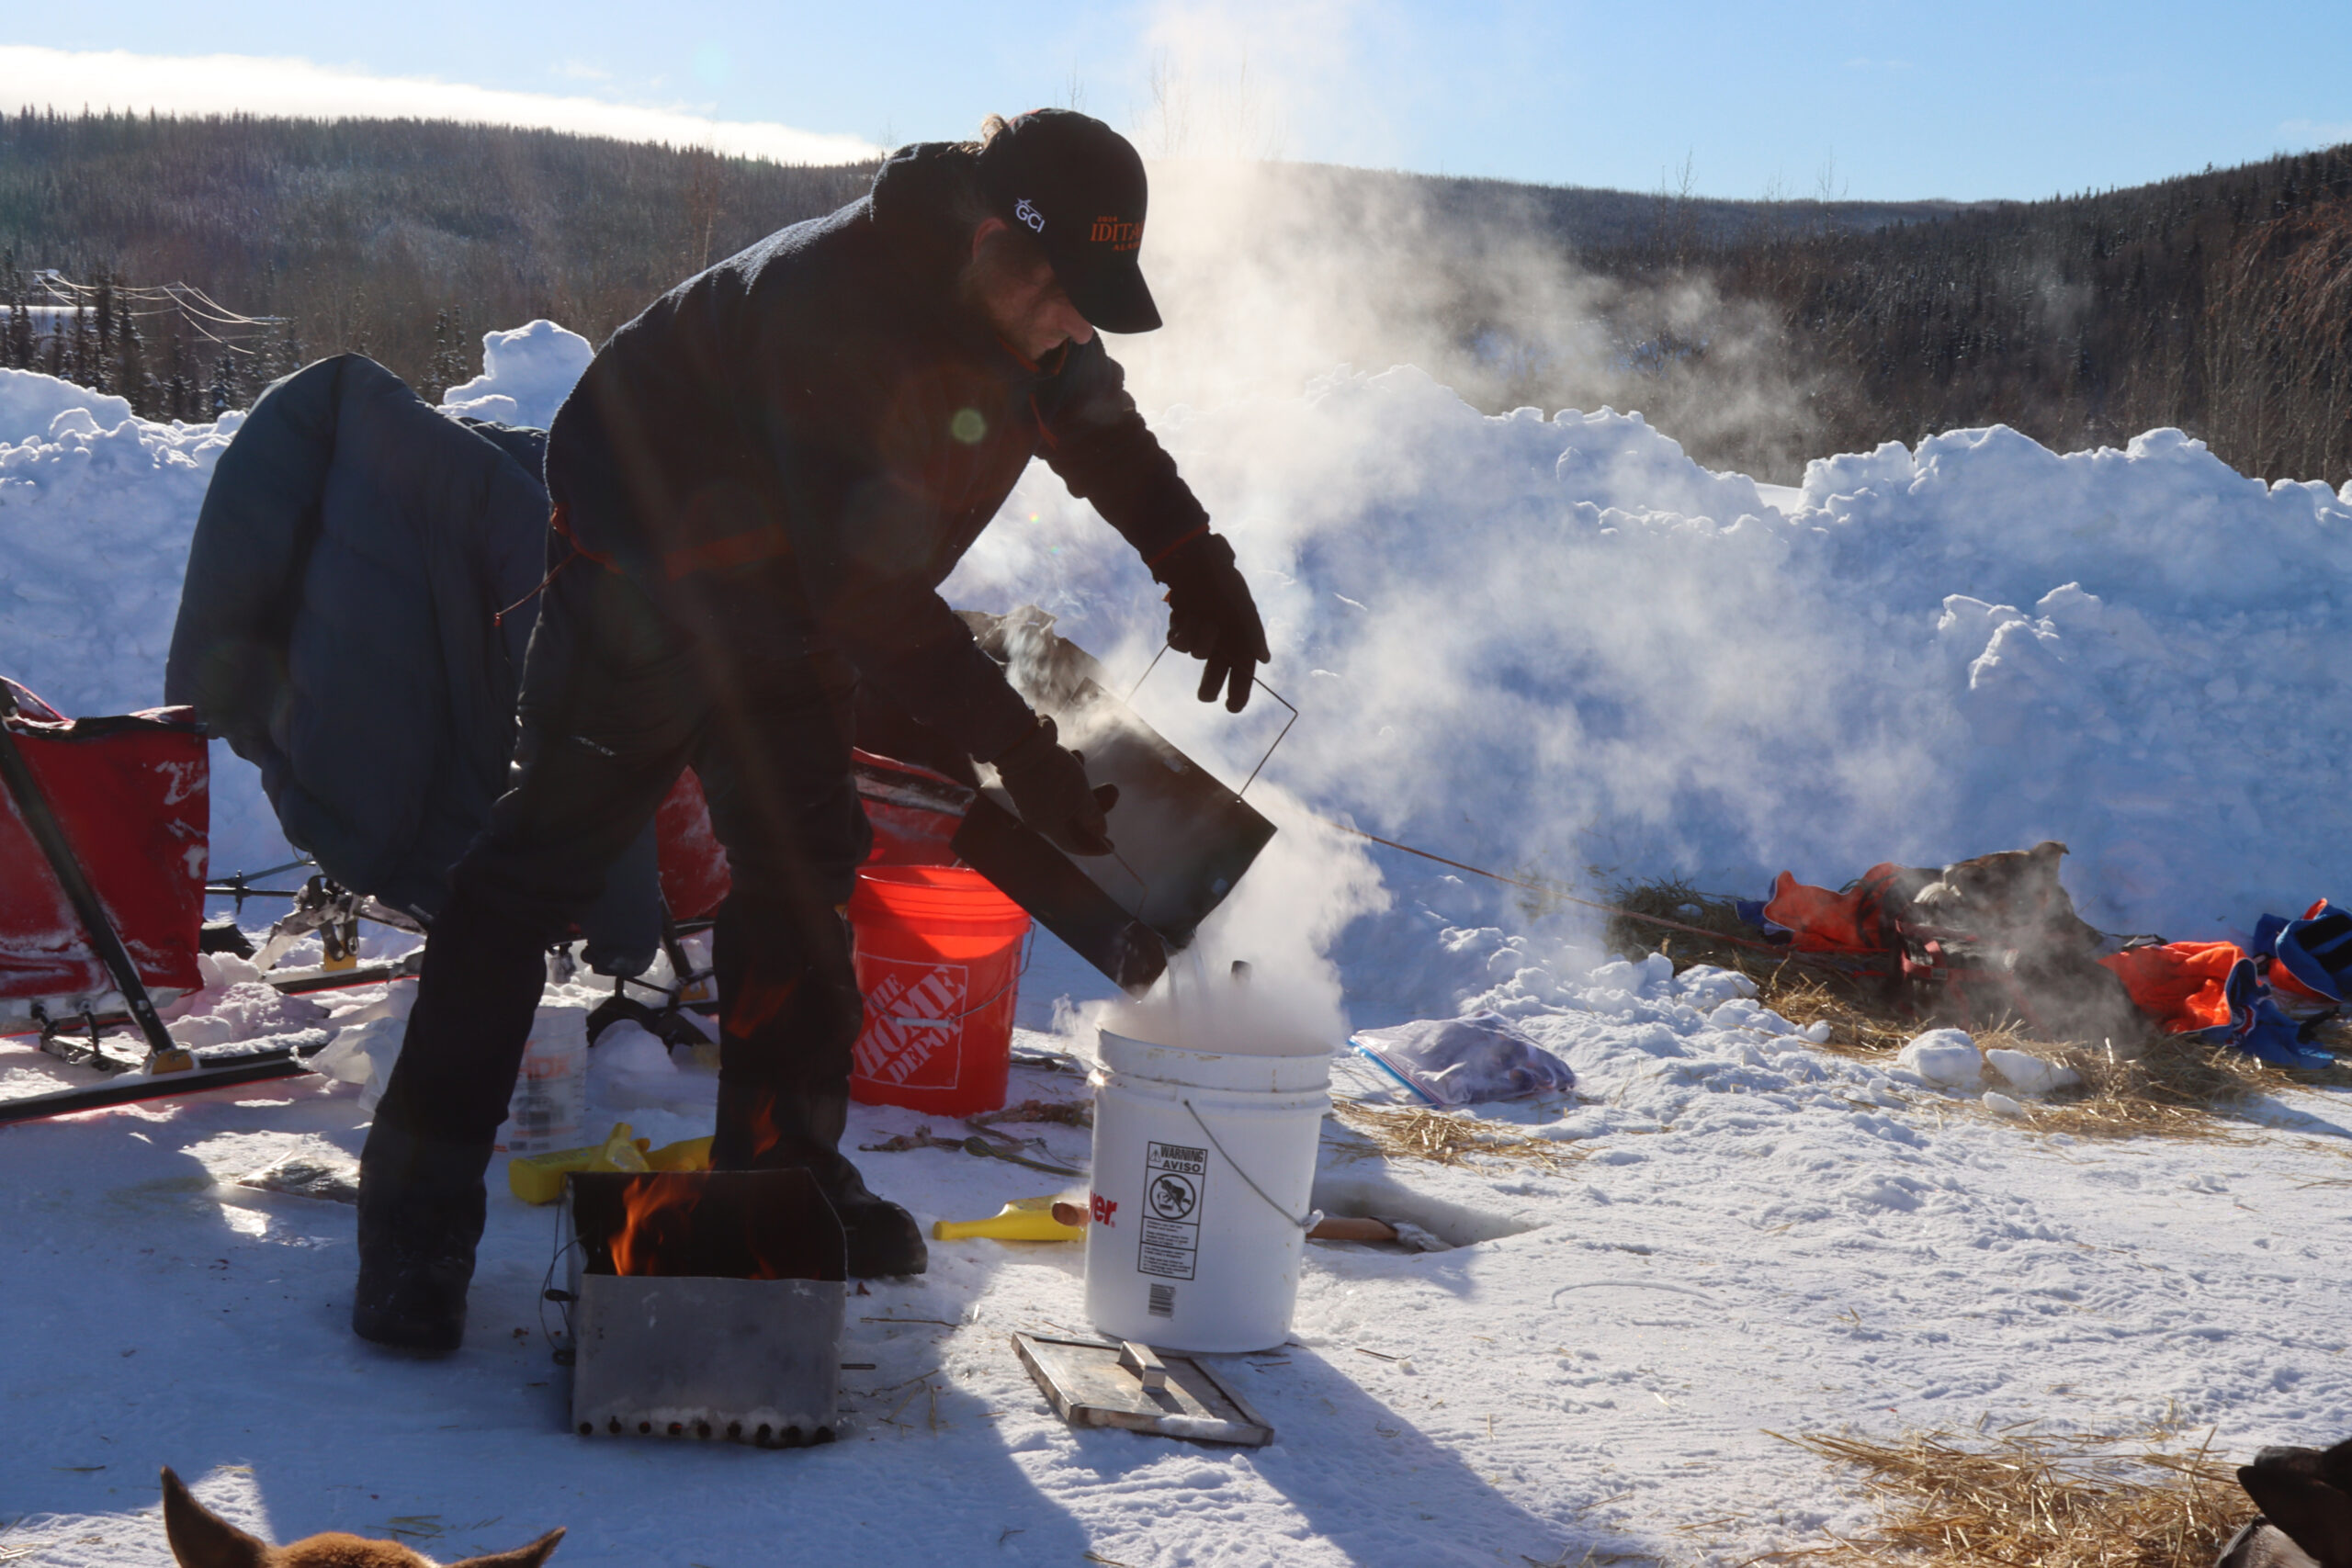 a musher mixes food and hot water, creating steam outside